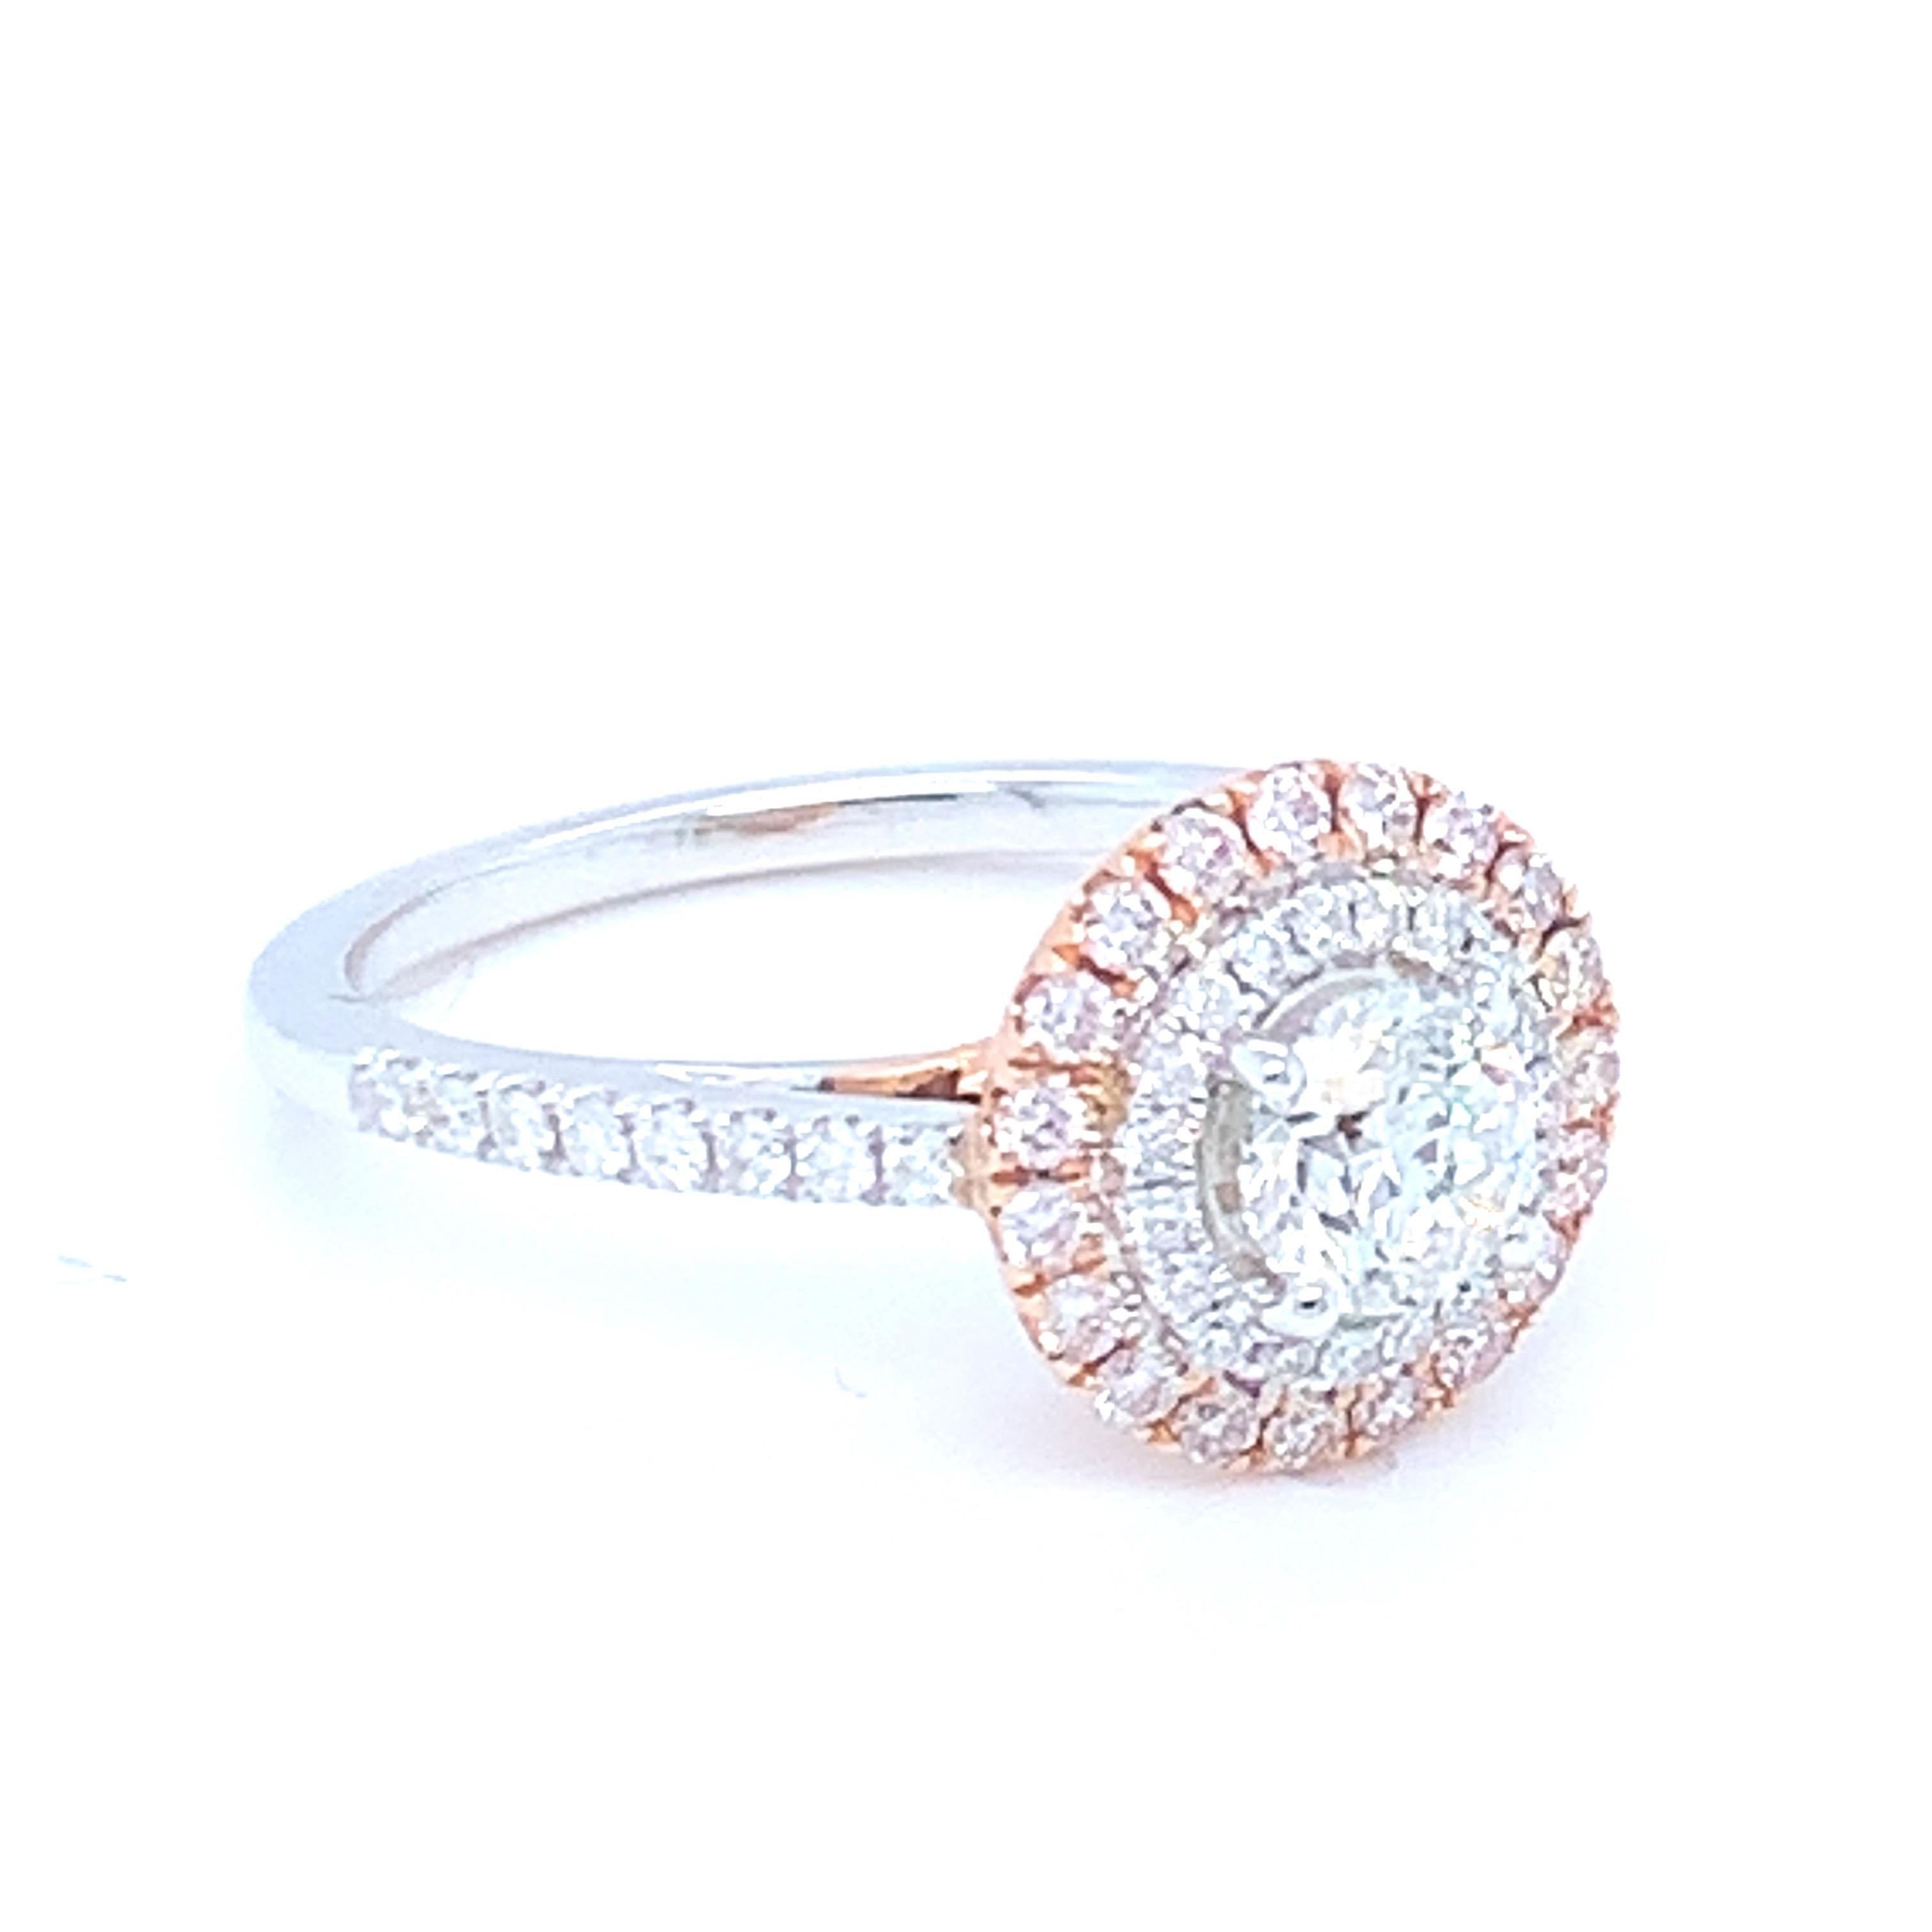 This lovely halo ring features a round diamond in the center surrounded by white and pink diamonds. Set in two tone gold to match the two tone diamond settings. This piece has been crafted by hand to achieve the finest quality. 
Center diamond: